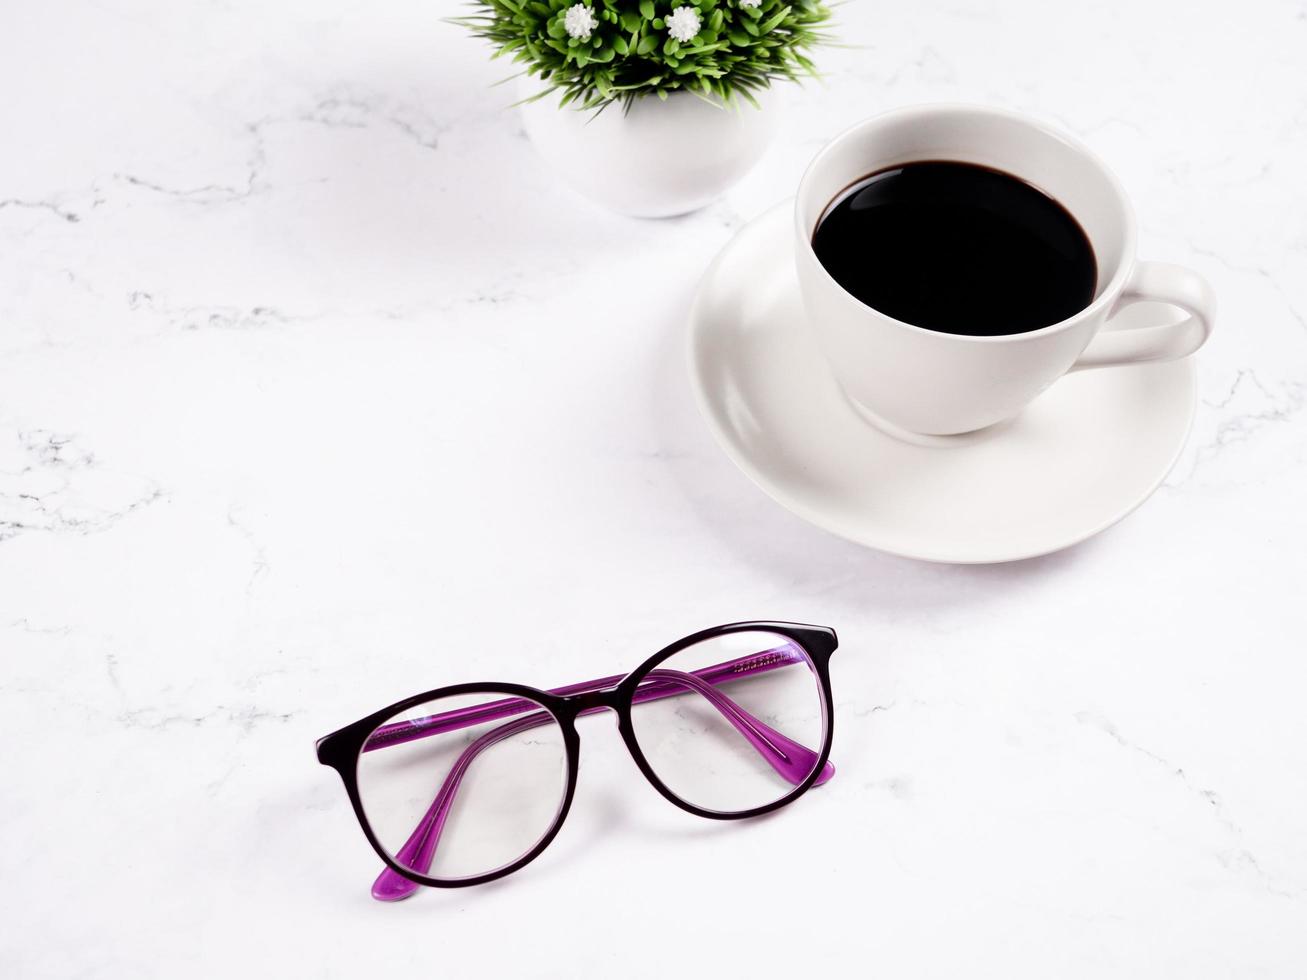 Glasses coffee cup with flower vase on the marble table background copy space morning photo